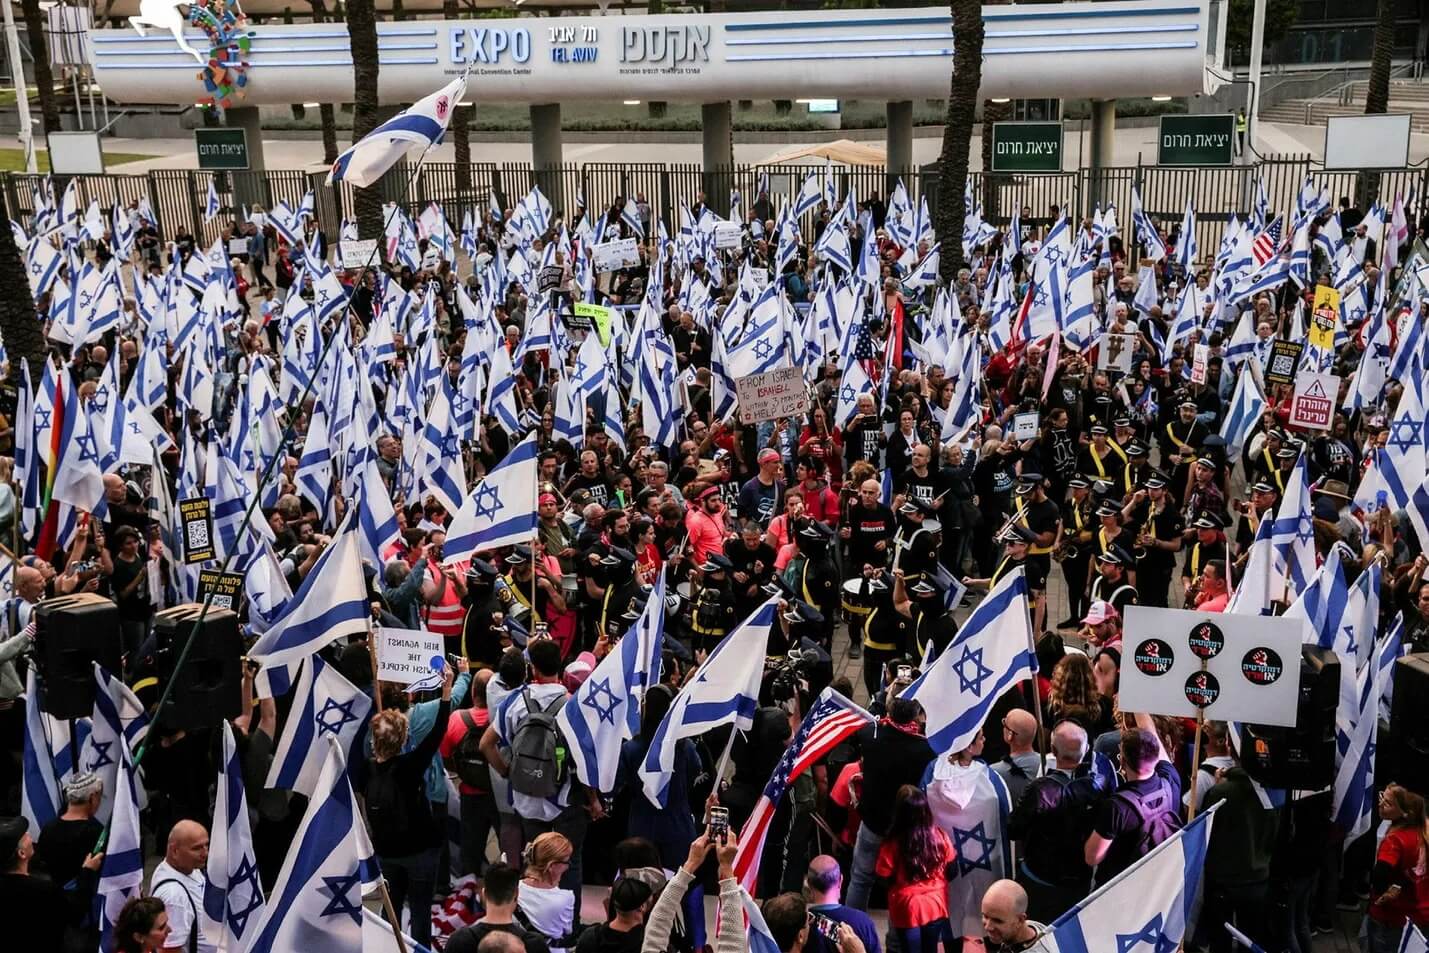 Israeli protesters gather outside the Jewish Federations of North America conference in Tel Aviv, where they angered some in the anti-government movement by extending invitations to Prime Minister Benjamin Netanyahu and far-right Knesset member Simcha Rothman.